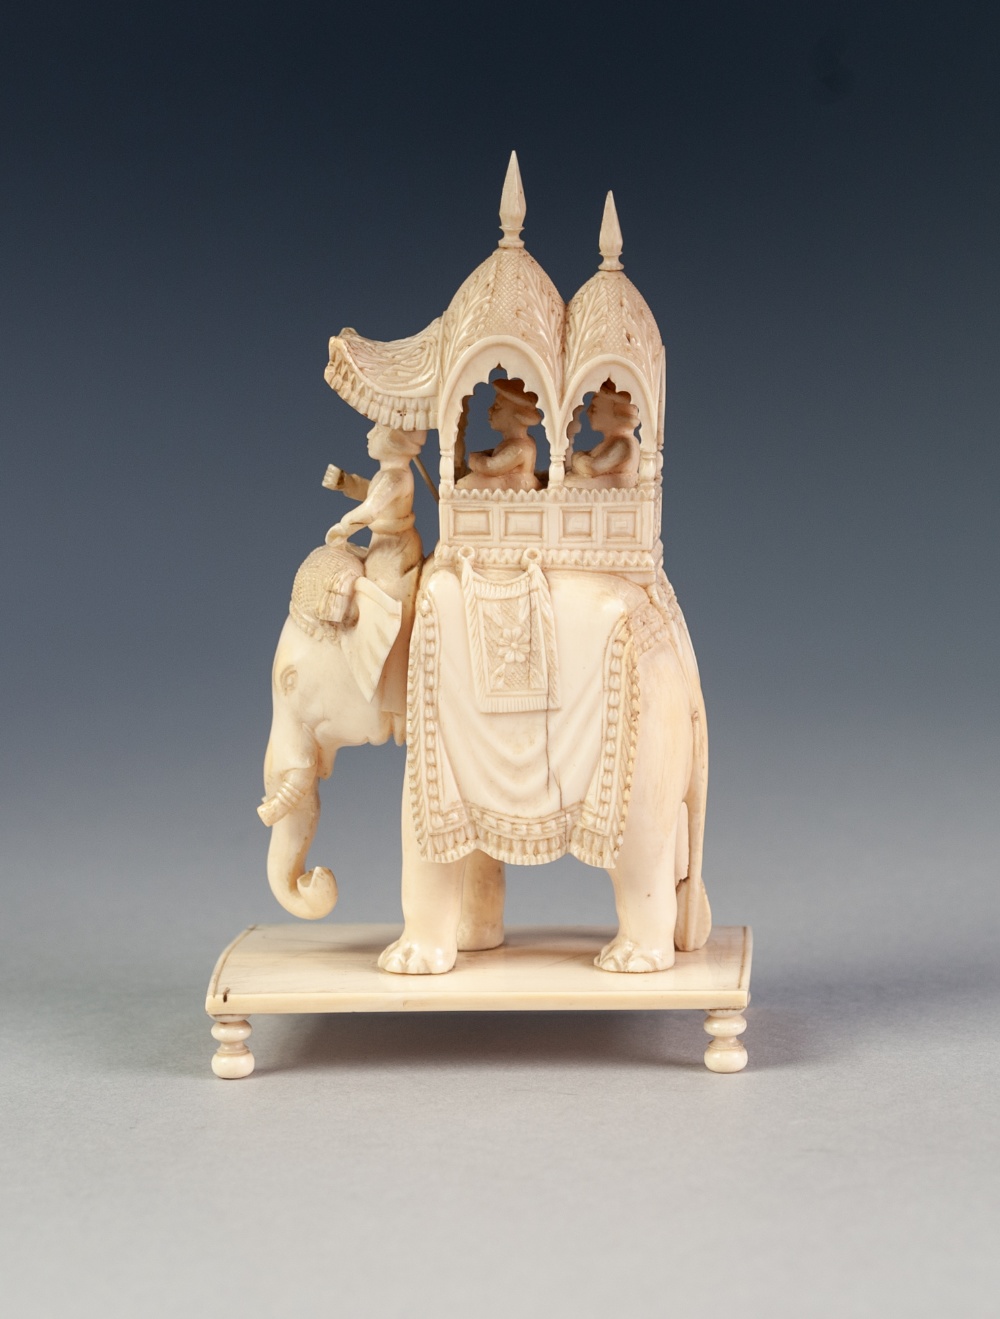 EARLY TWENTIETH CENTURY INDIAN CARVED IVORY GROUP OF FIGURES IN A HOWDAH ON A CEREMONIAL ELEPHANT, - Image 3 of 7